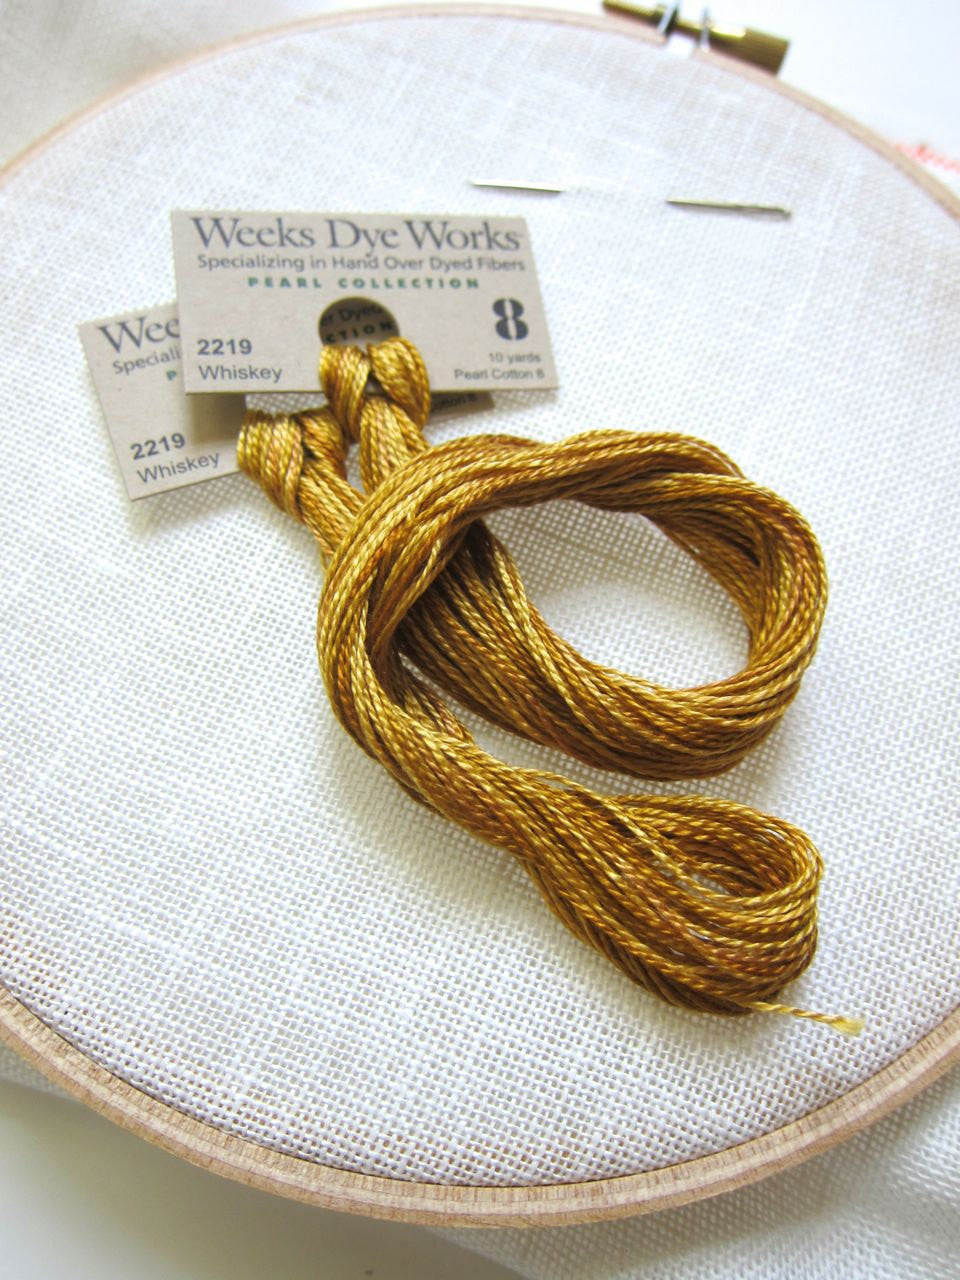 Weeks Dye Works Hand Over-Dyed Perle Cotton - Size 8 Whiskey Perle Cotton - Snuggly Monkey